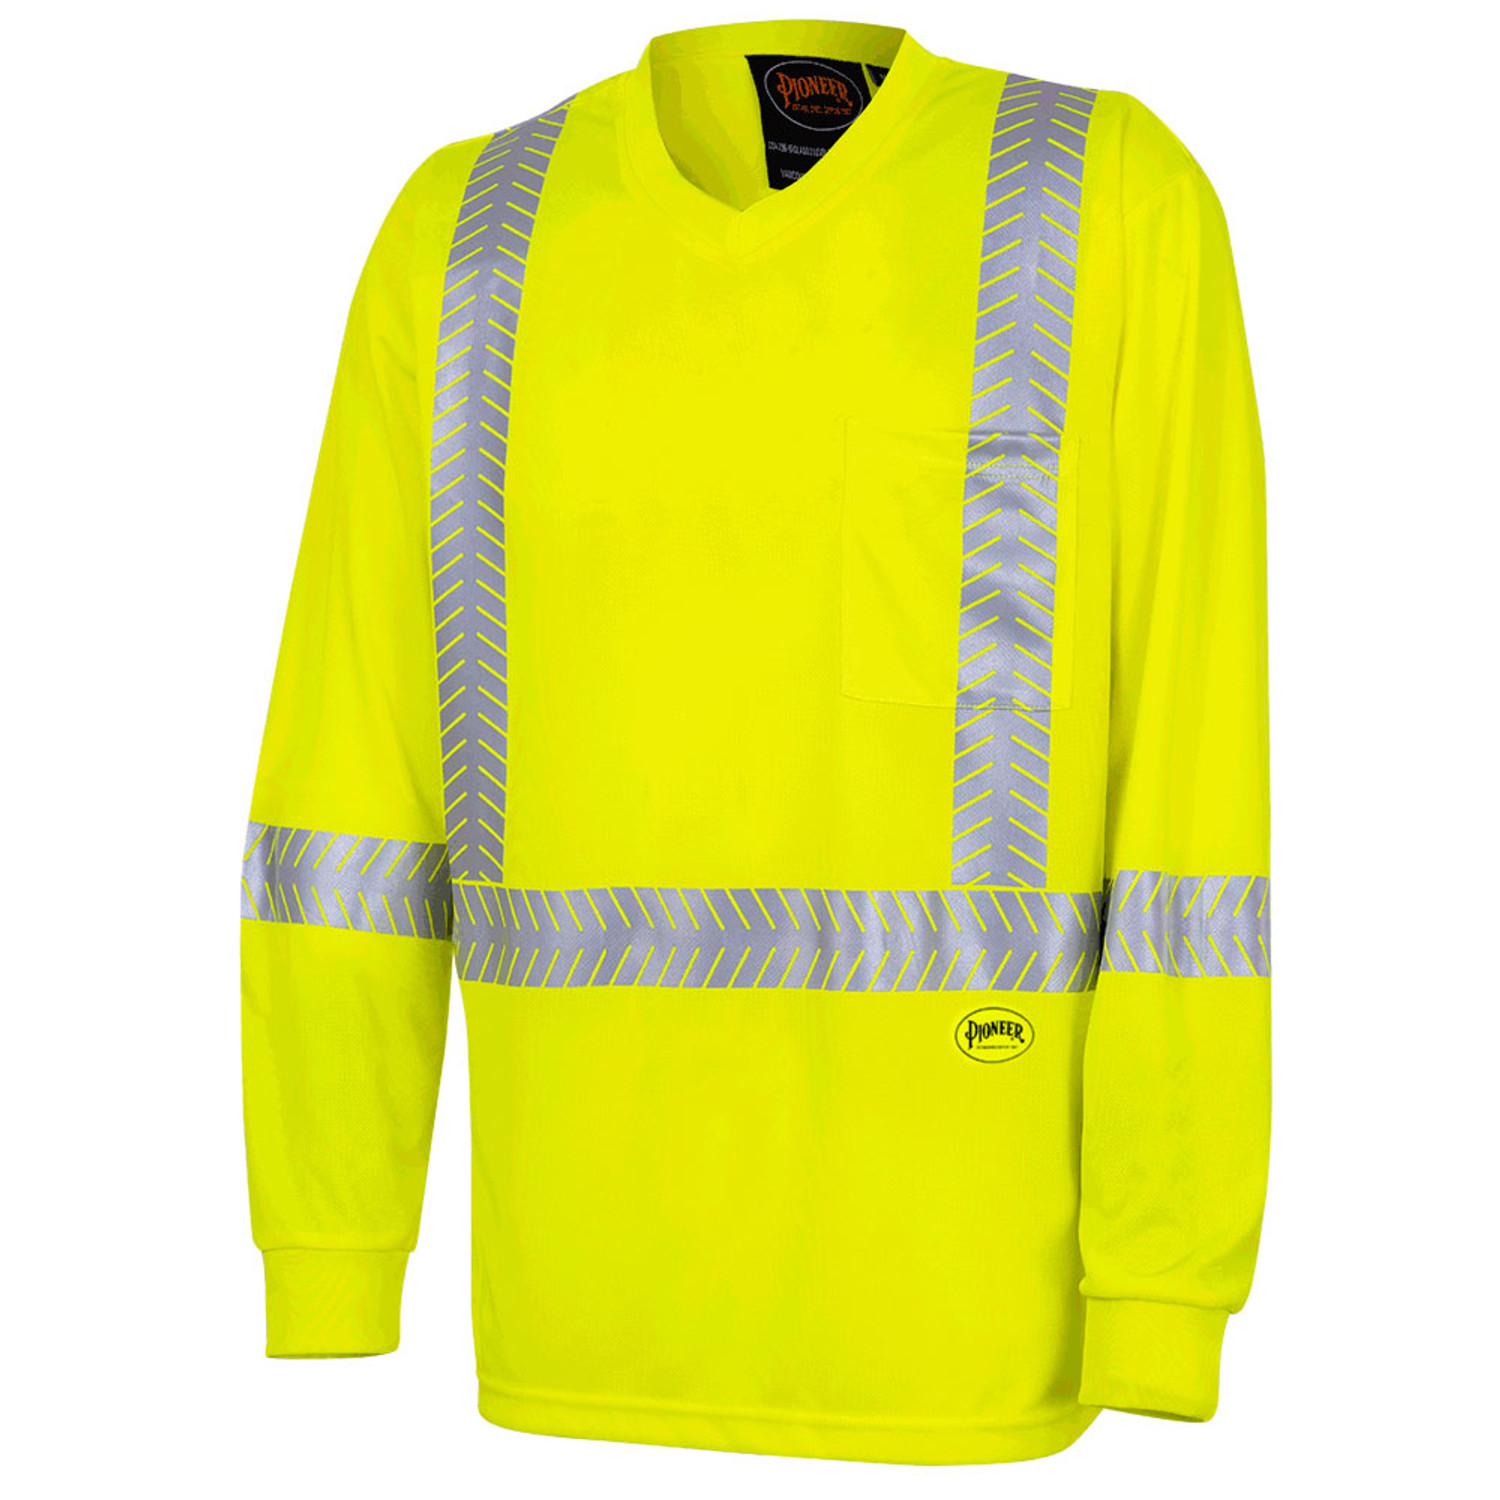 https://cdn11.bigcommerce.com/s-10f42/images/stencil/1500x1500/products/2699/6252/pioneer-uv-protection-long-sleeve-shirt-safetywear.ca__96145.1632250520.jpg?c=2